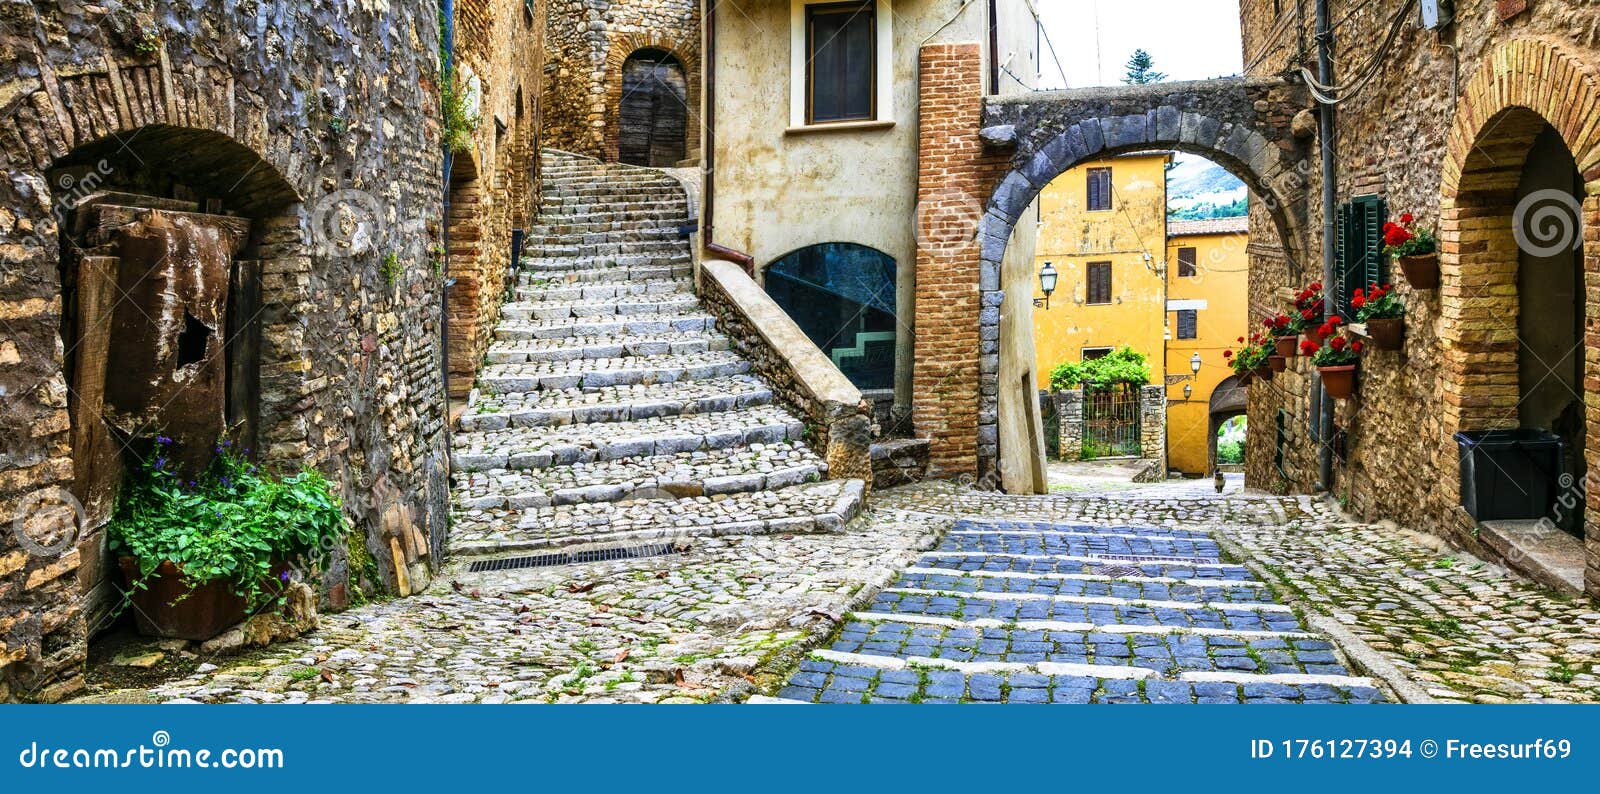 traditional medieval villages of italy - picturesque old floral streets of casperia, rieti province